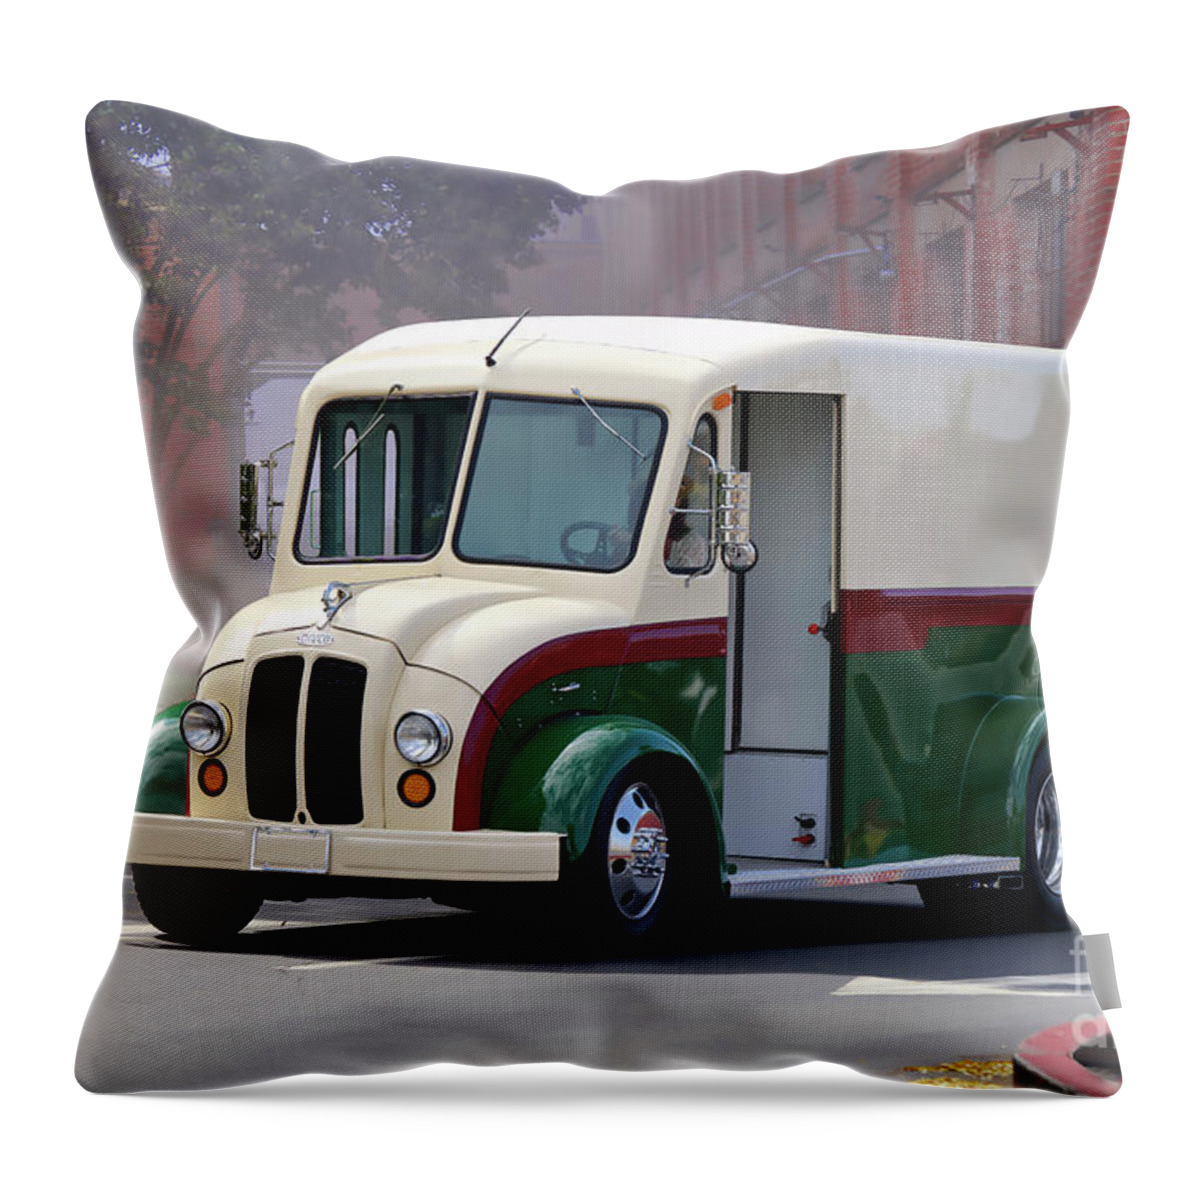 1964 Divco Delivery Van Throw Pillow featuring the photograph 1964 Divco Delivery Van by Dave Koontz